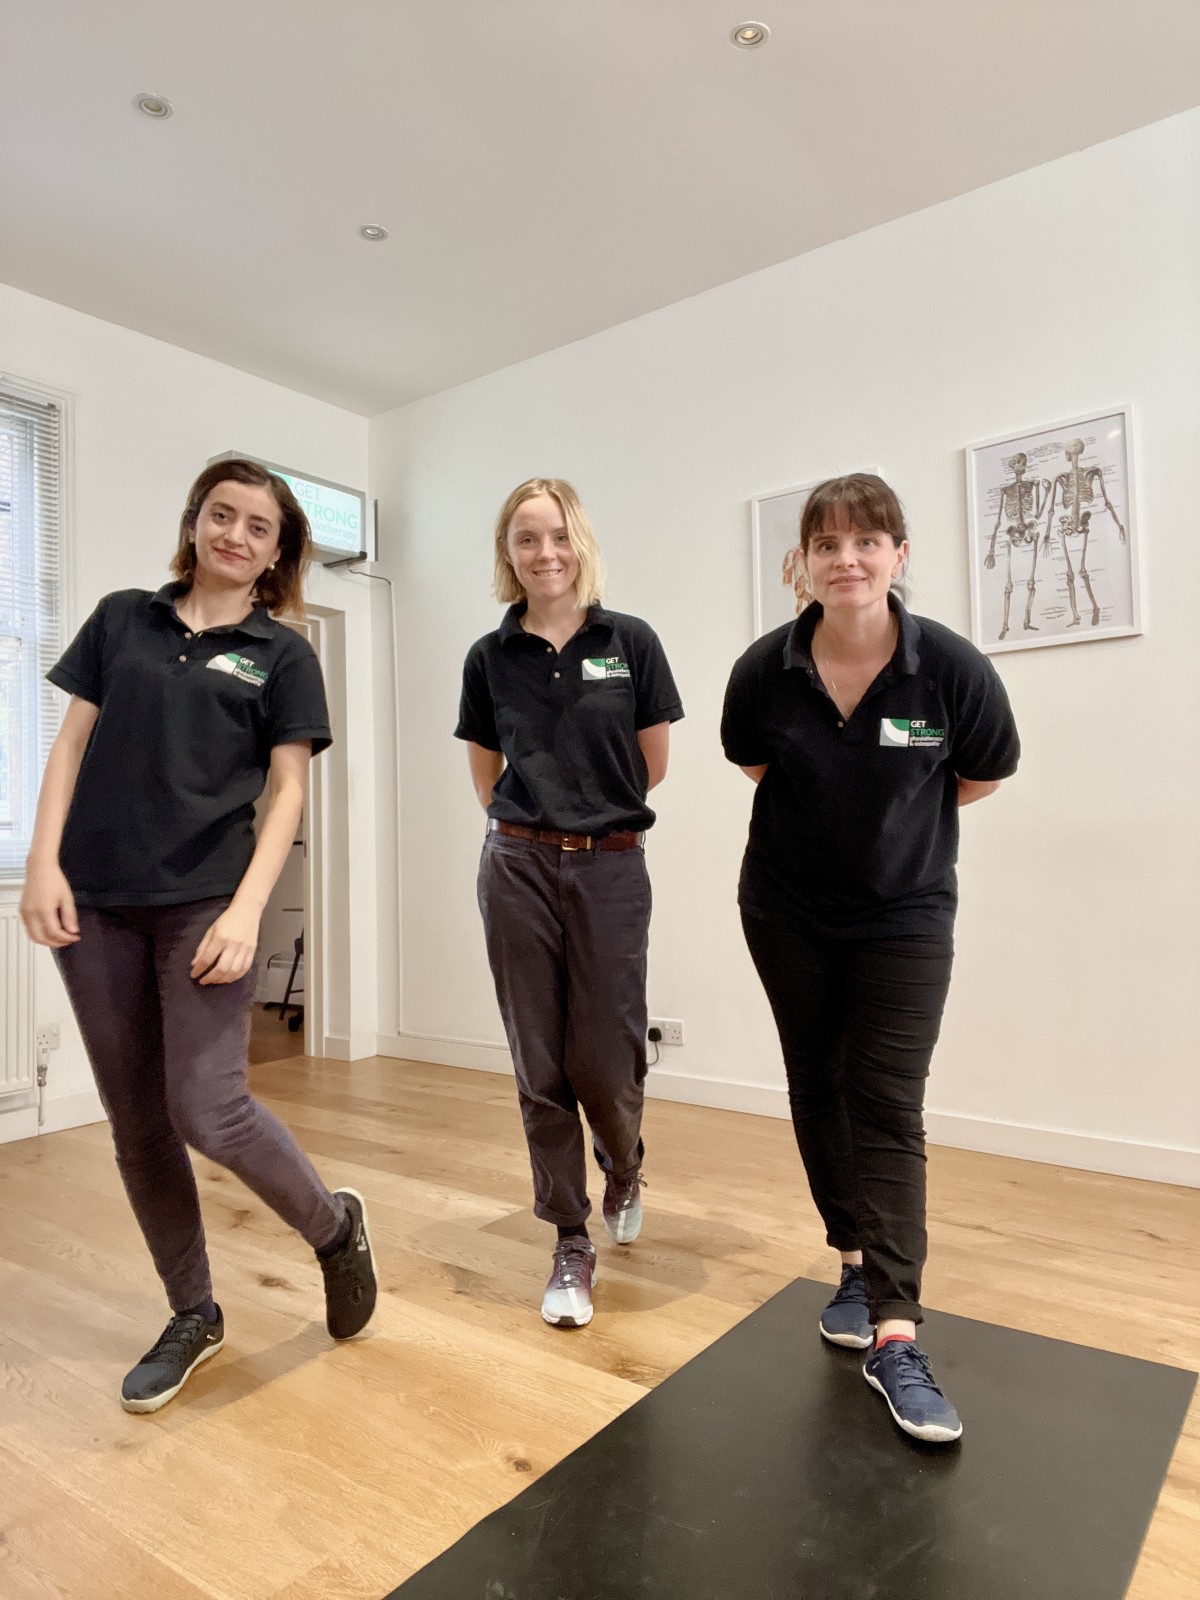 Thanks for your feedback, it helps our small business grow. Claire, Demet, and Isabelle, at Get Strong physiotherapy & osteopathy  